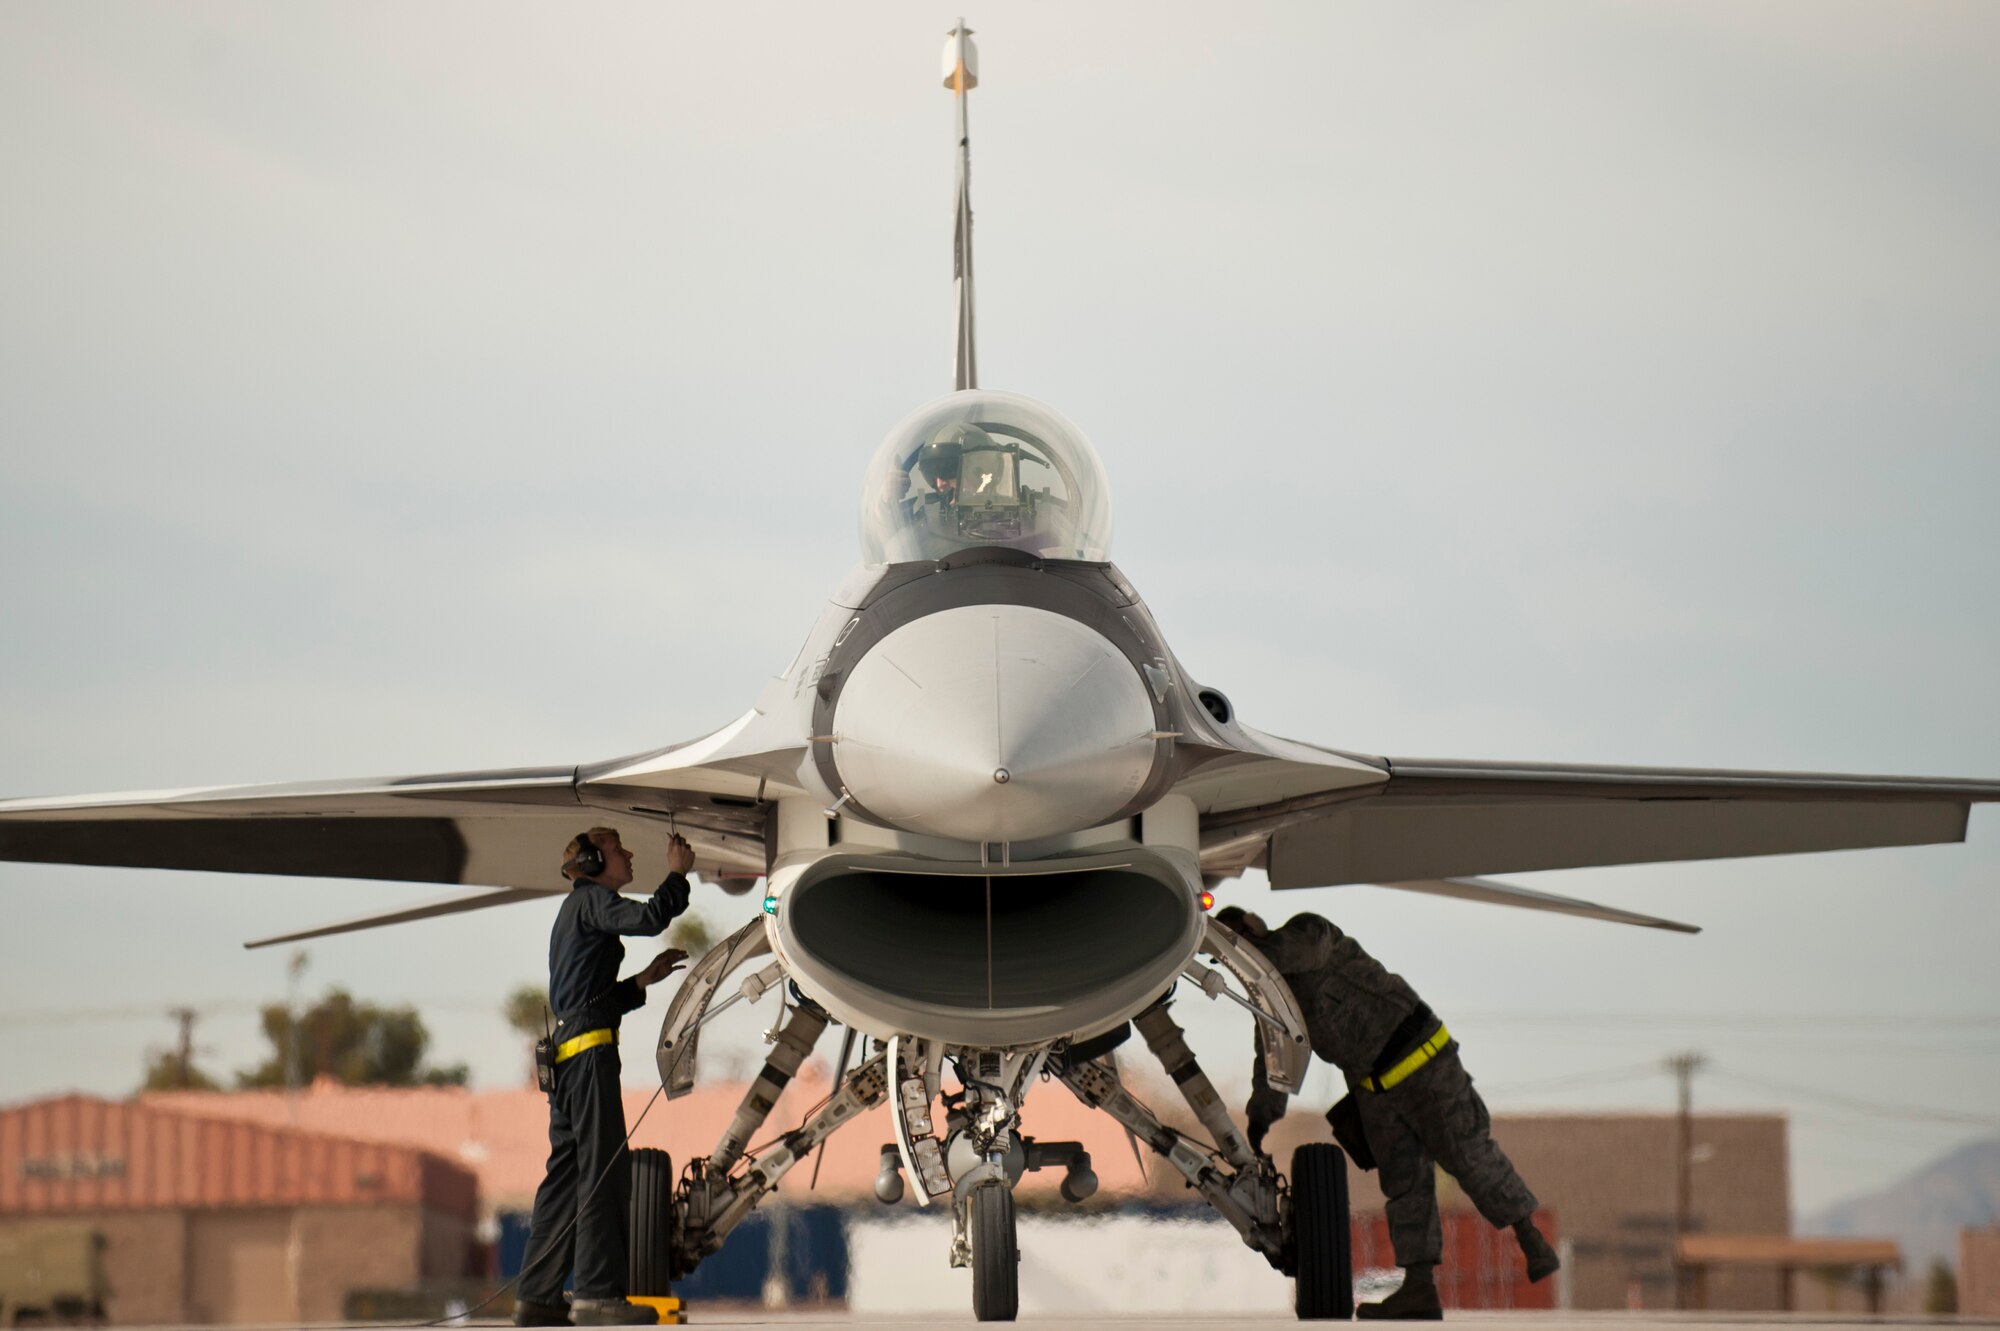 Aircraft maintainers from the 757th Aircraft Maintenance Squadron Viper Aircraft Maintenance Unit, perform preflight checks on an F-16 Fighting Falcon from the 64th Aggressor Squadron before a Red Flag 14-1 training mission Jan. 29, 2014, at Nellis Air Force Base Nevada. Pilots of the 64th AGRS are trained in the use of adversary tactics and act as part of the “Red Force” during Red Flag exercises. Red Flag provides realistic combat training in a contested, degraded and operationally limited environment providing real-time war scenarios. (U.S. Air Force photo by Airman 1st Class Joshua Kleinholz)